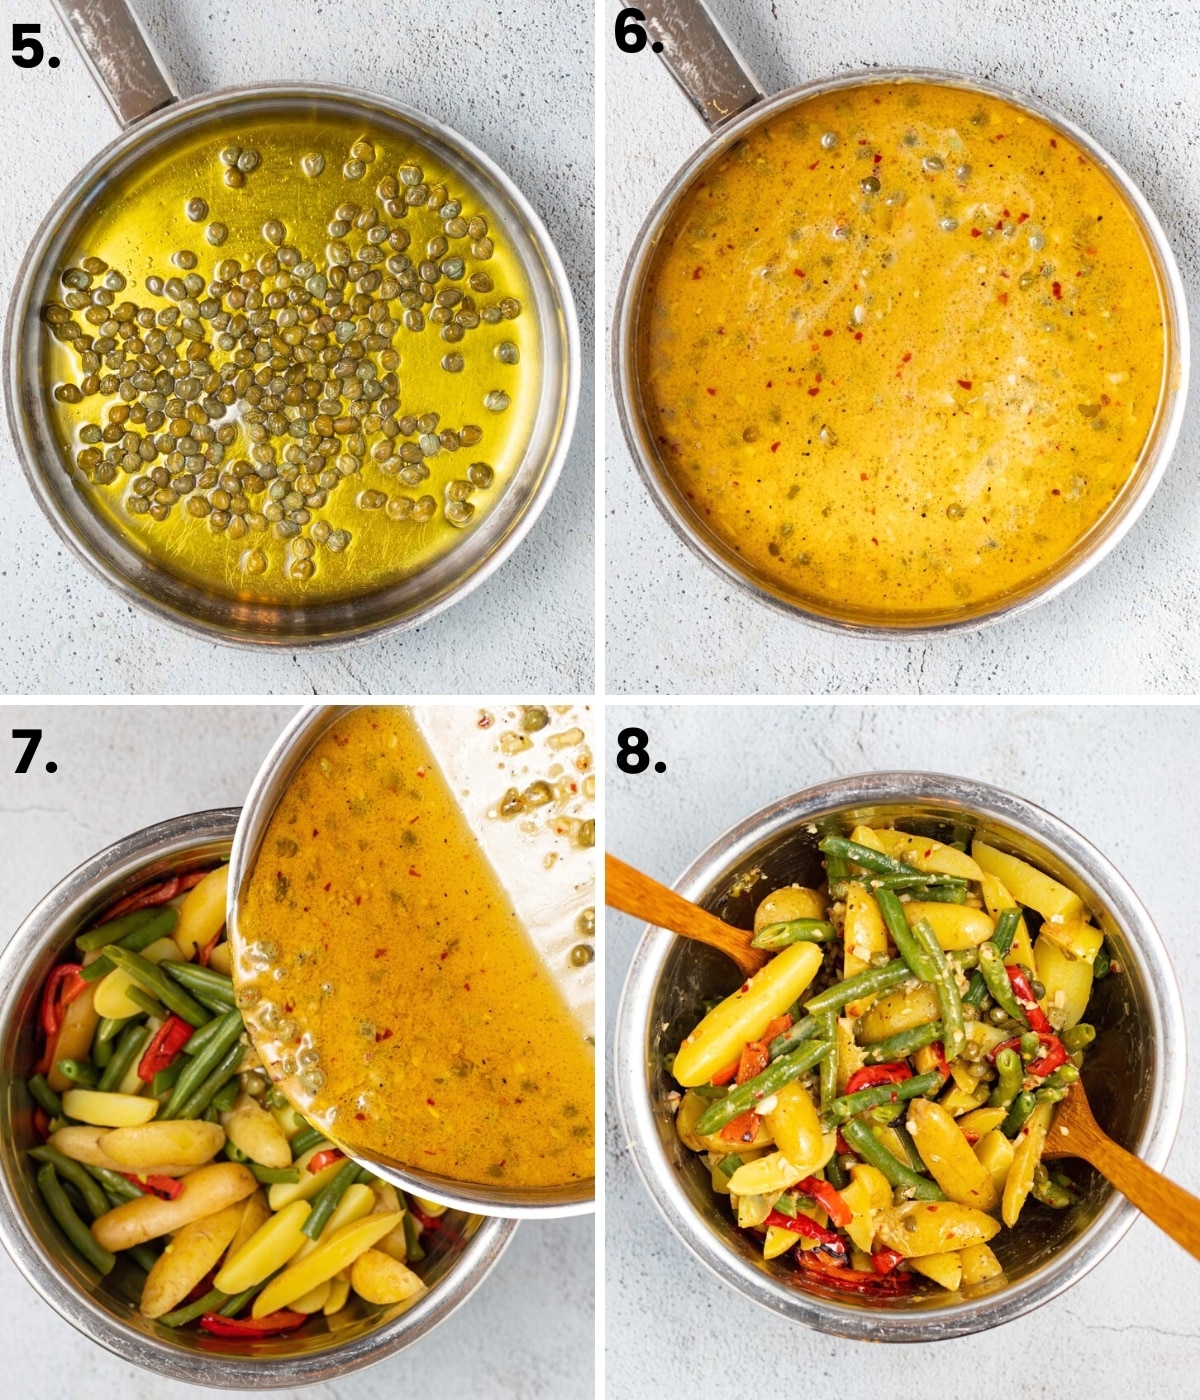 4 images: capers and olive oil in a pan, finished vinaigrette in a pan, pouring the vinaigrette over the potatoes, beans and peppers, tossing them together in a bowl. 